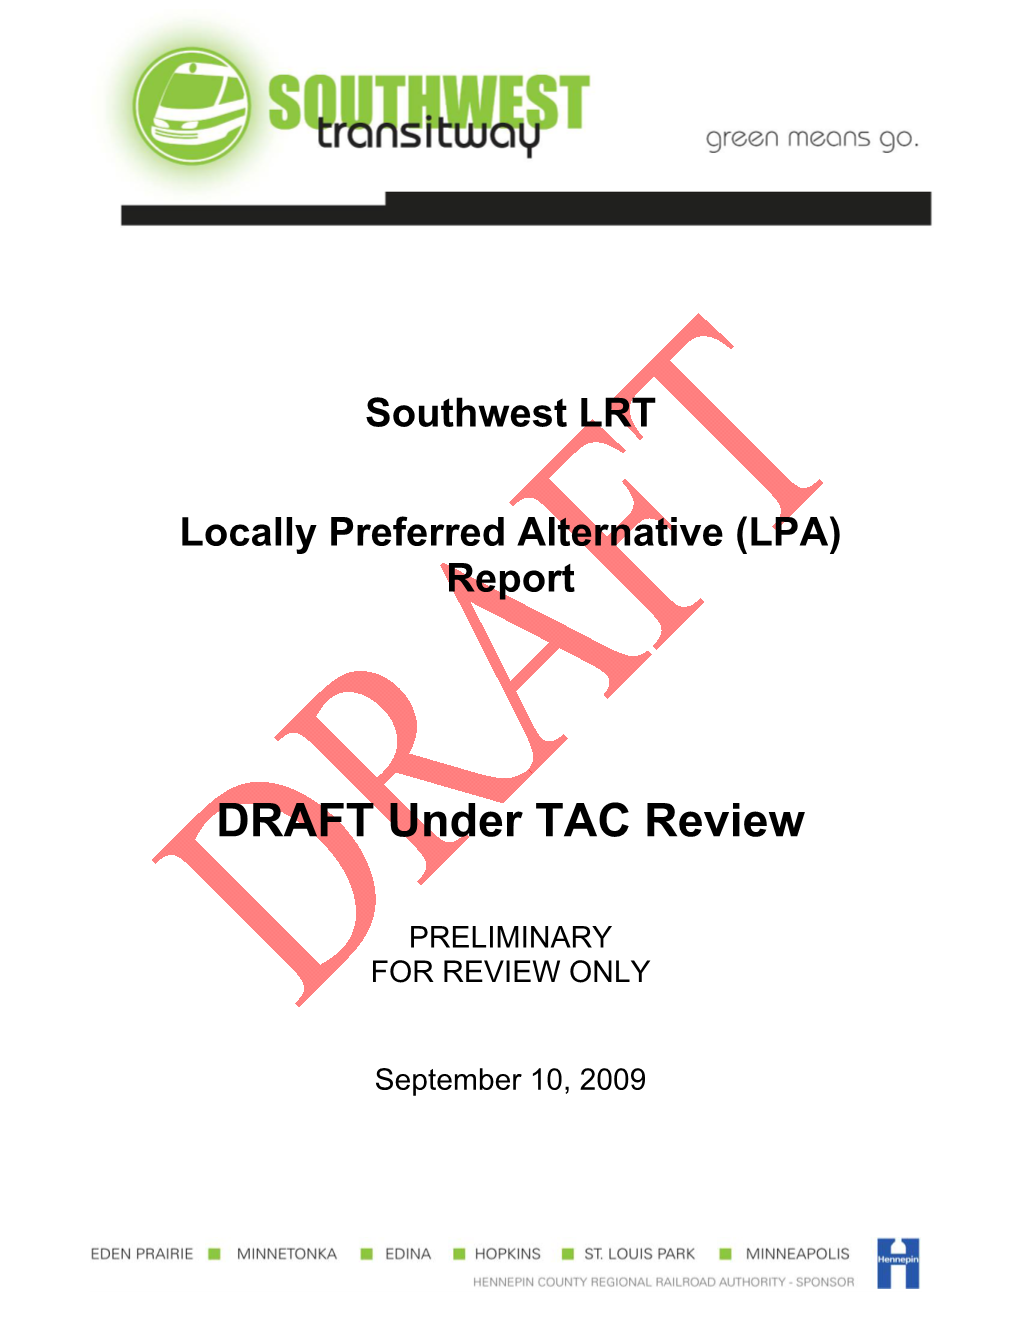 Locally Preferred Alternative Report (Draft Under TAC Review)